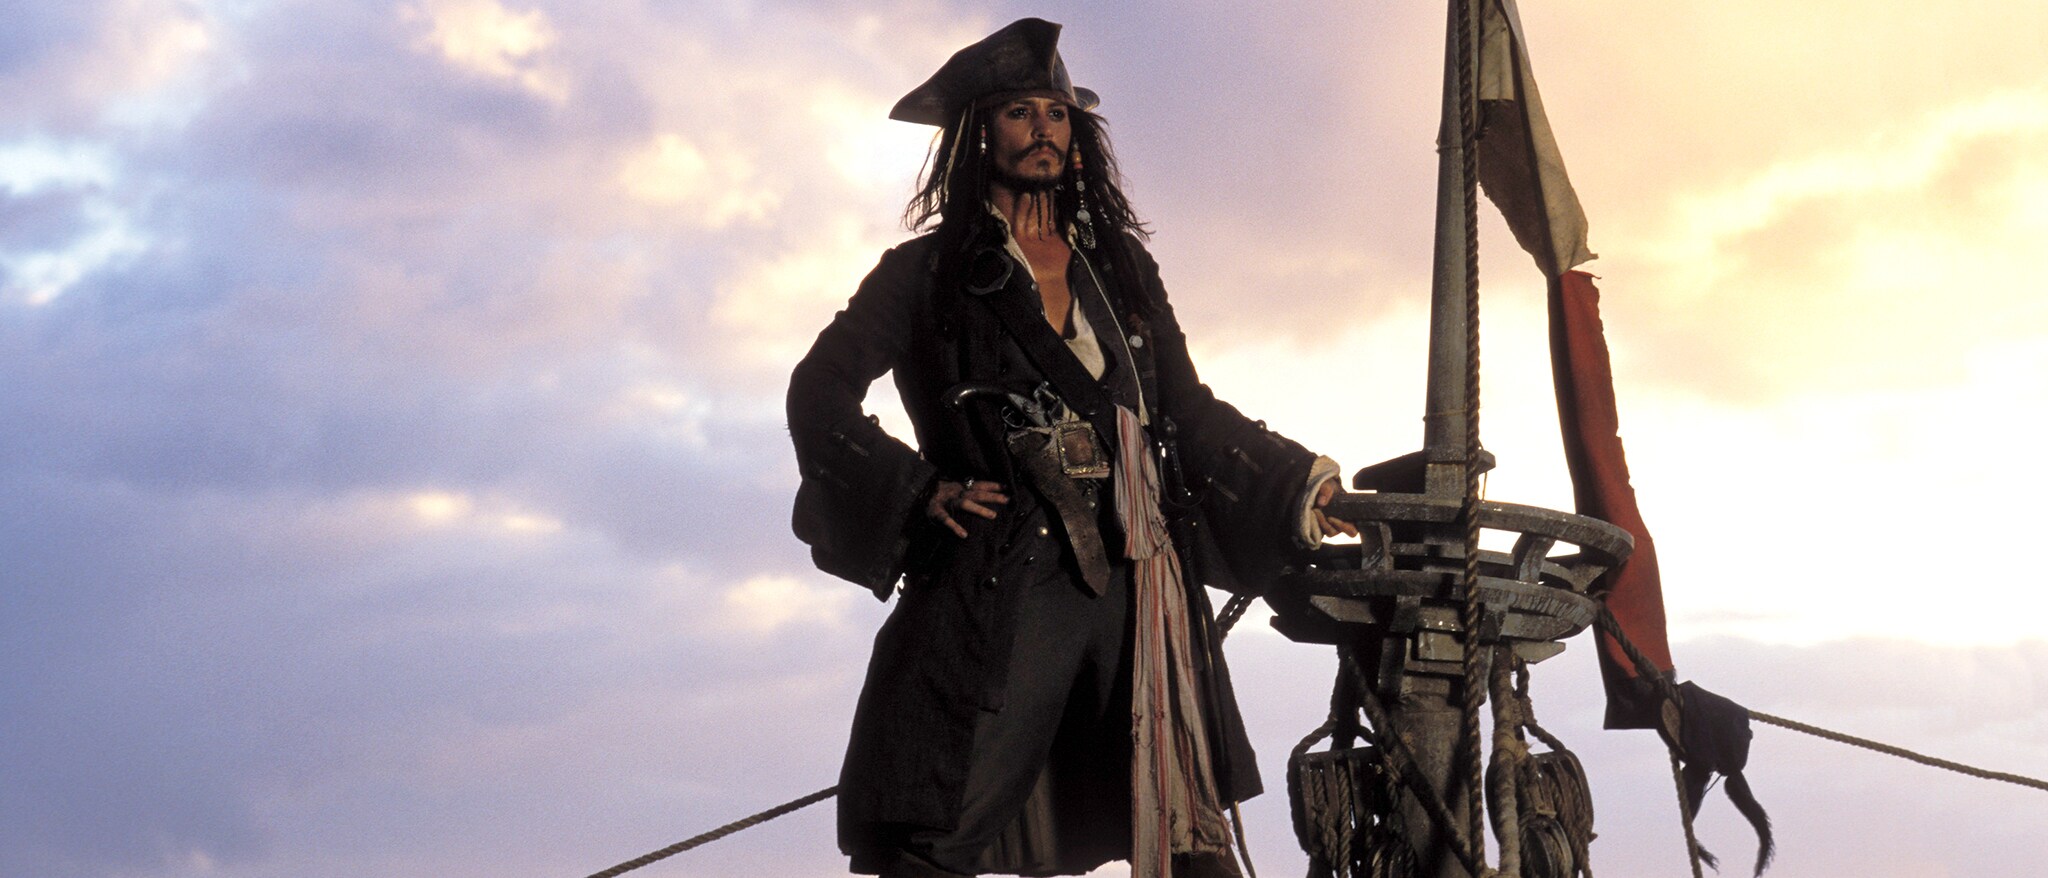 Pirates of the Caribbean: The Curse of the Black Pearl Hero